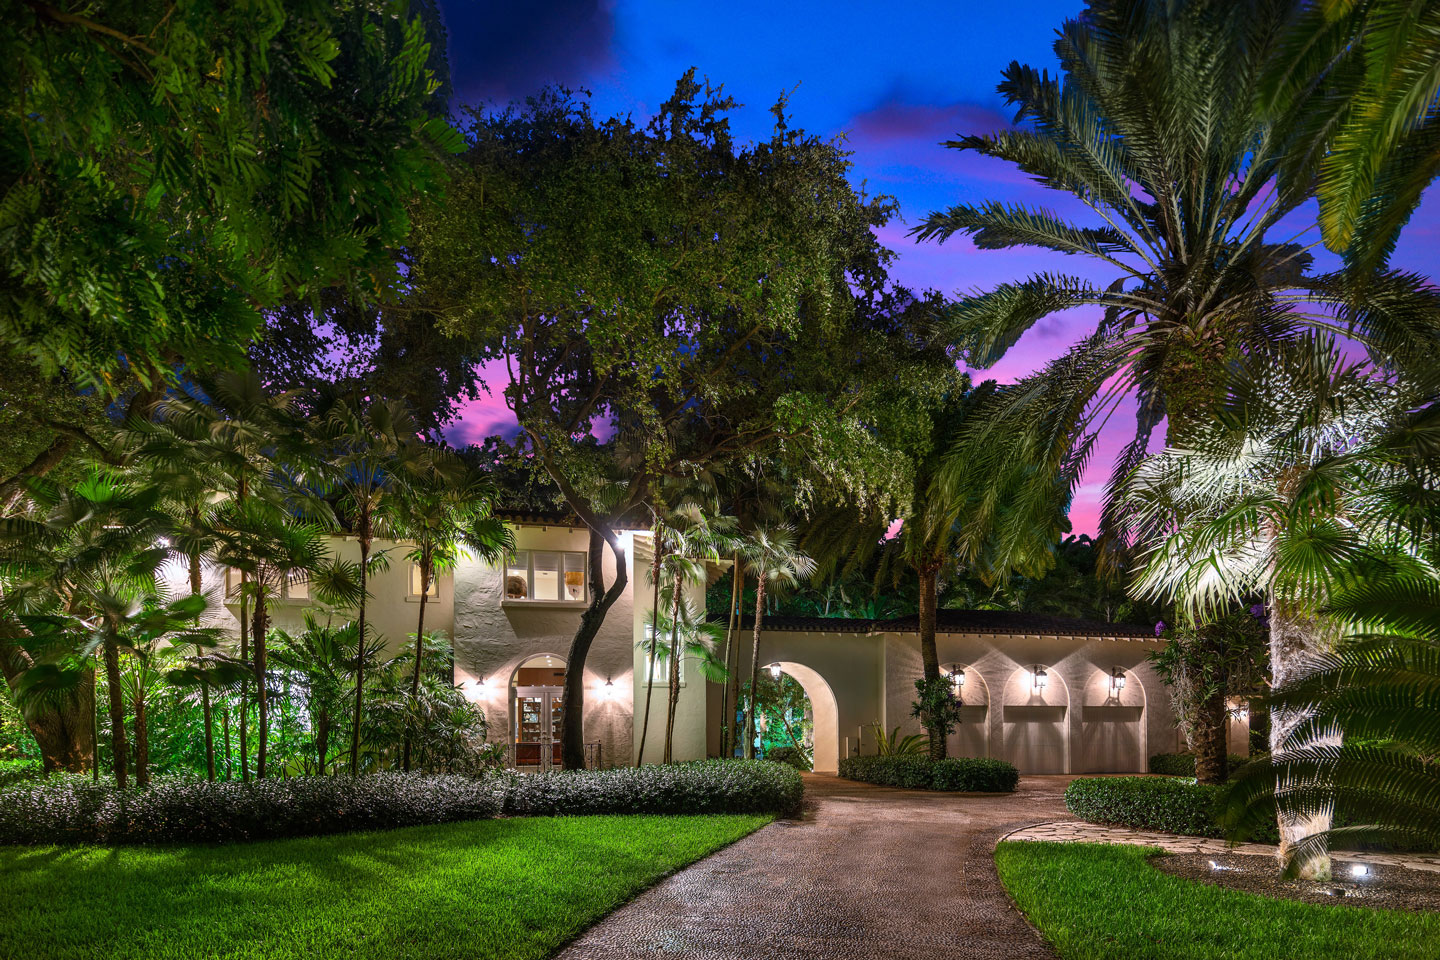 3725 Leafy Way, Coconut Grove, Miami, Florida, USA | Alley | Listed by Dennis Carvajal, Real Estate Agent, ONE Sotheby's International Realty | Finest Residences